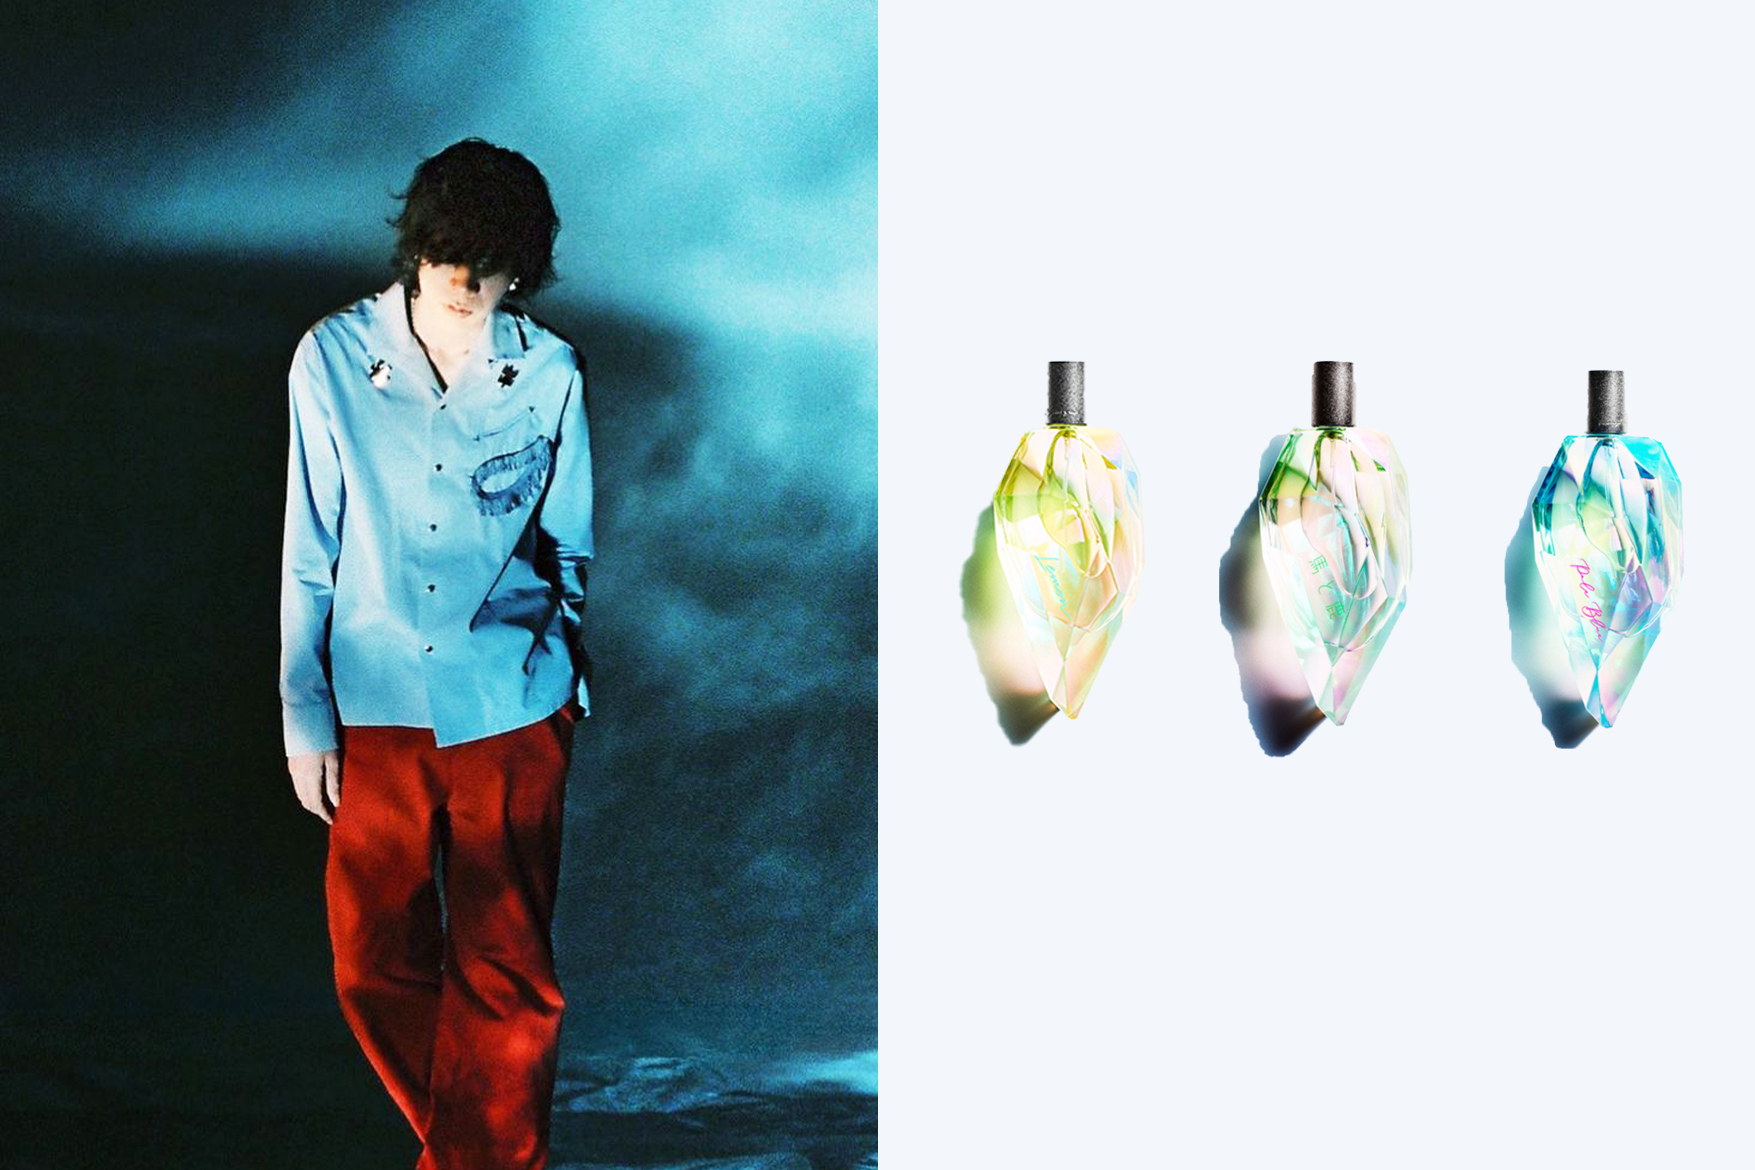 Kenshi-Yonezu-luanch-new-home-fragrances-collection-inspired-by-songs-11